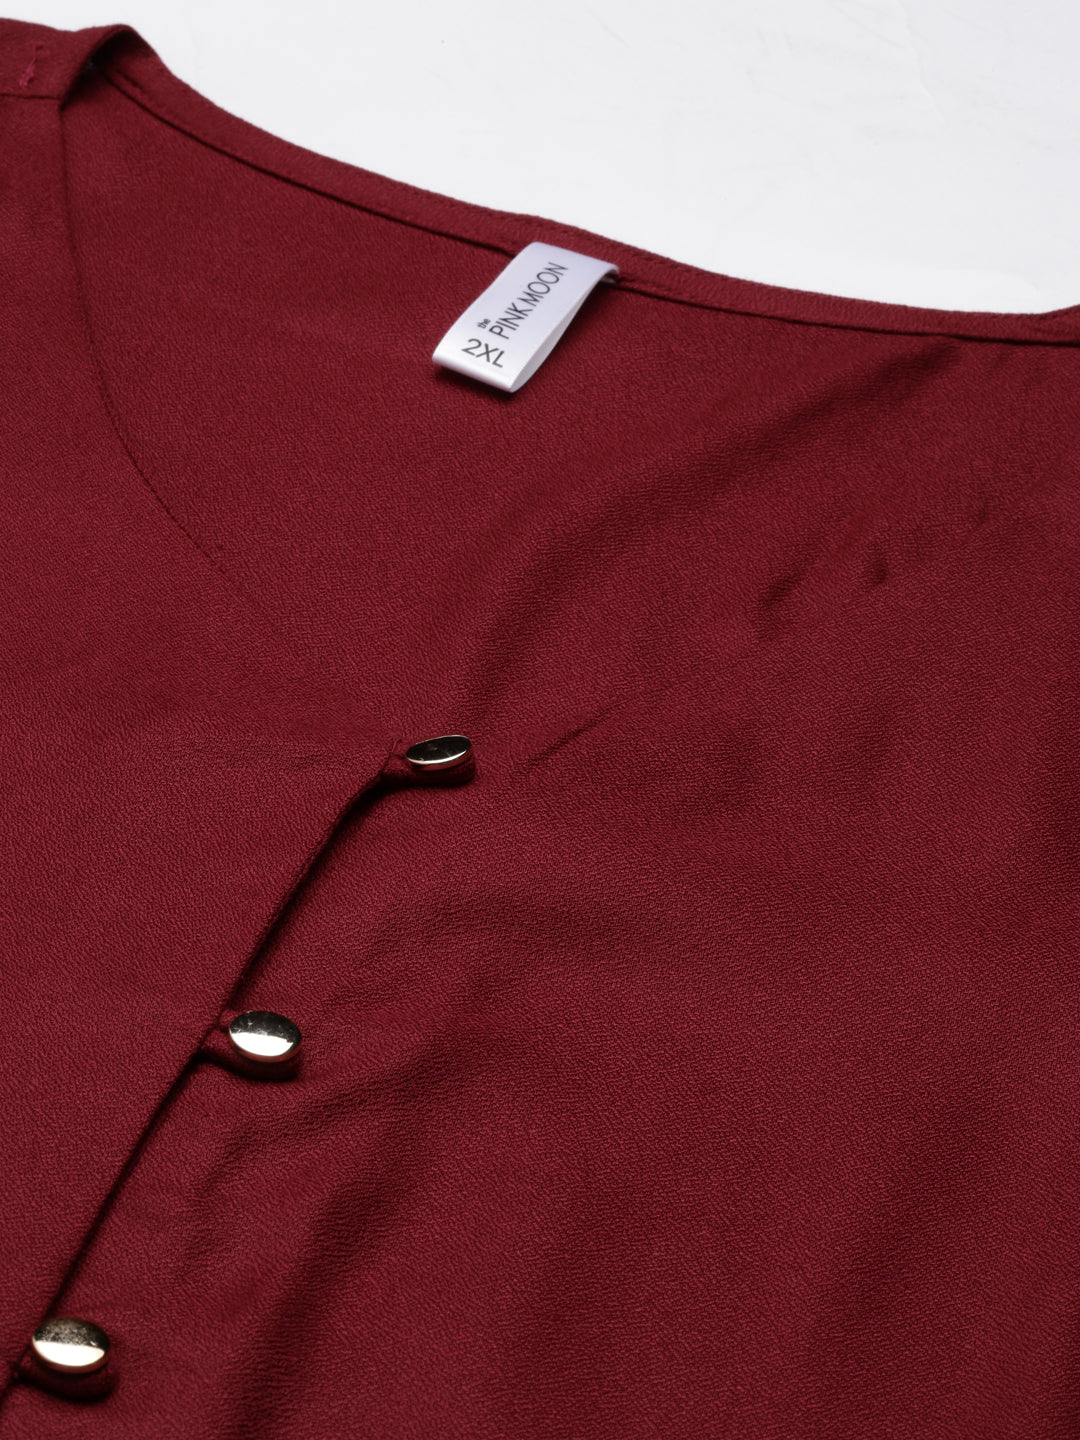 SOLID BUTTON SHIRT STYLE BURGUNDY TOP